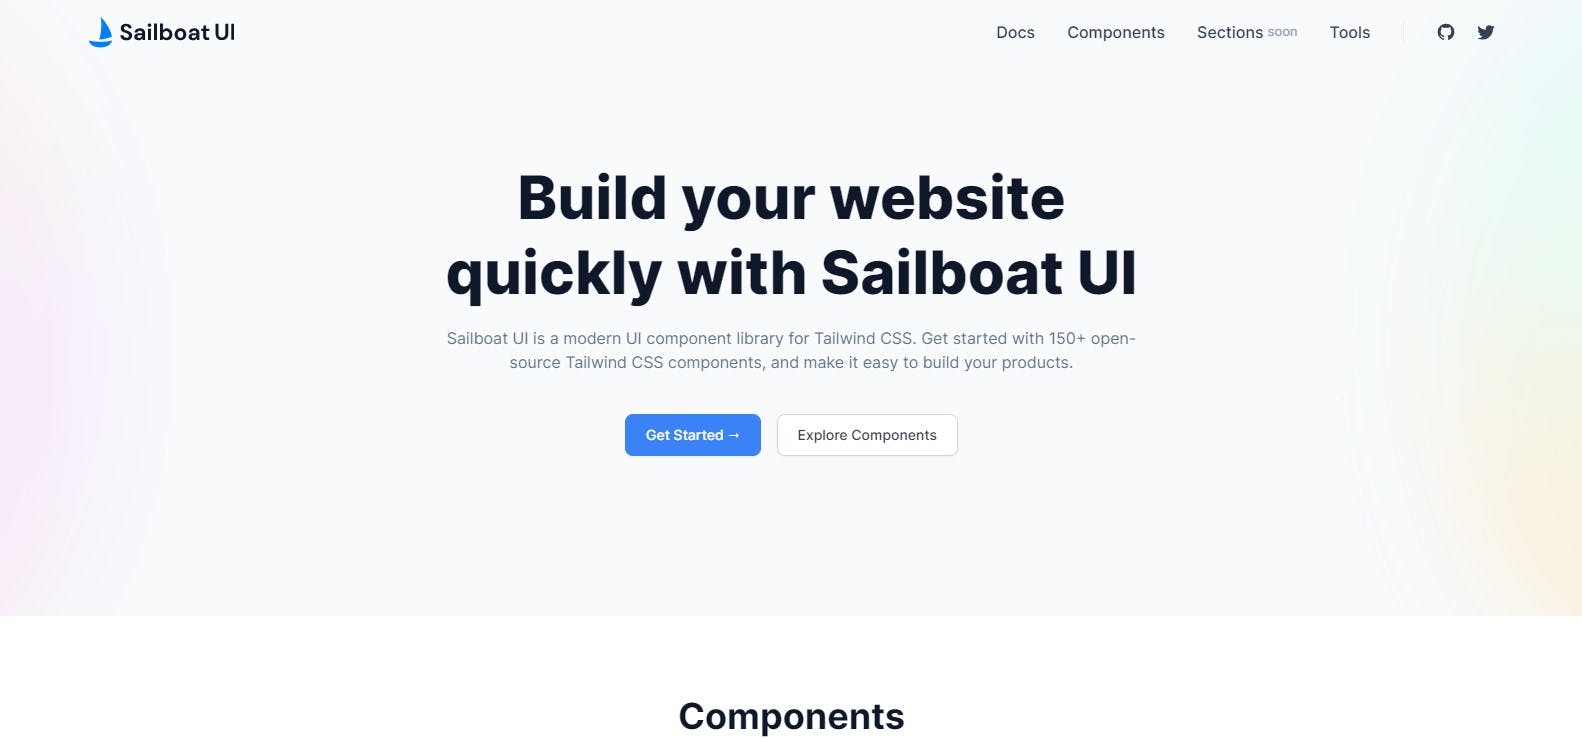 Sailboat UI-Tailwind CSS components